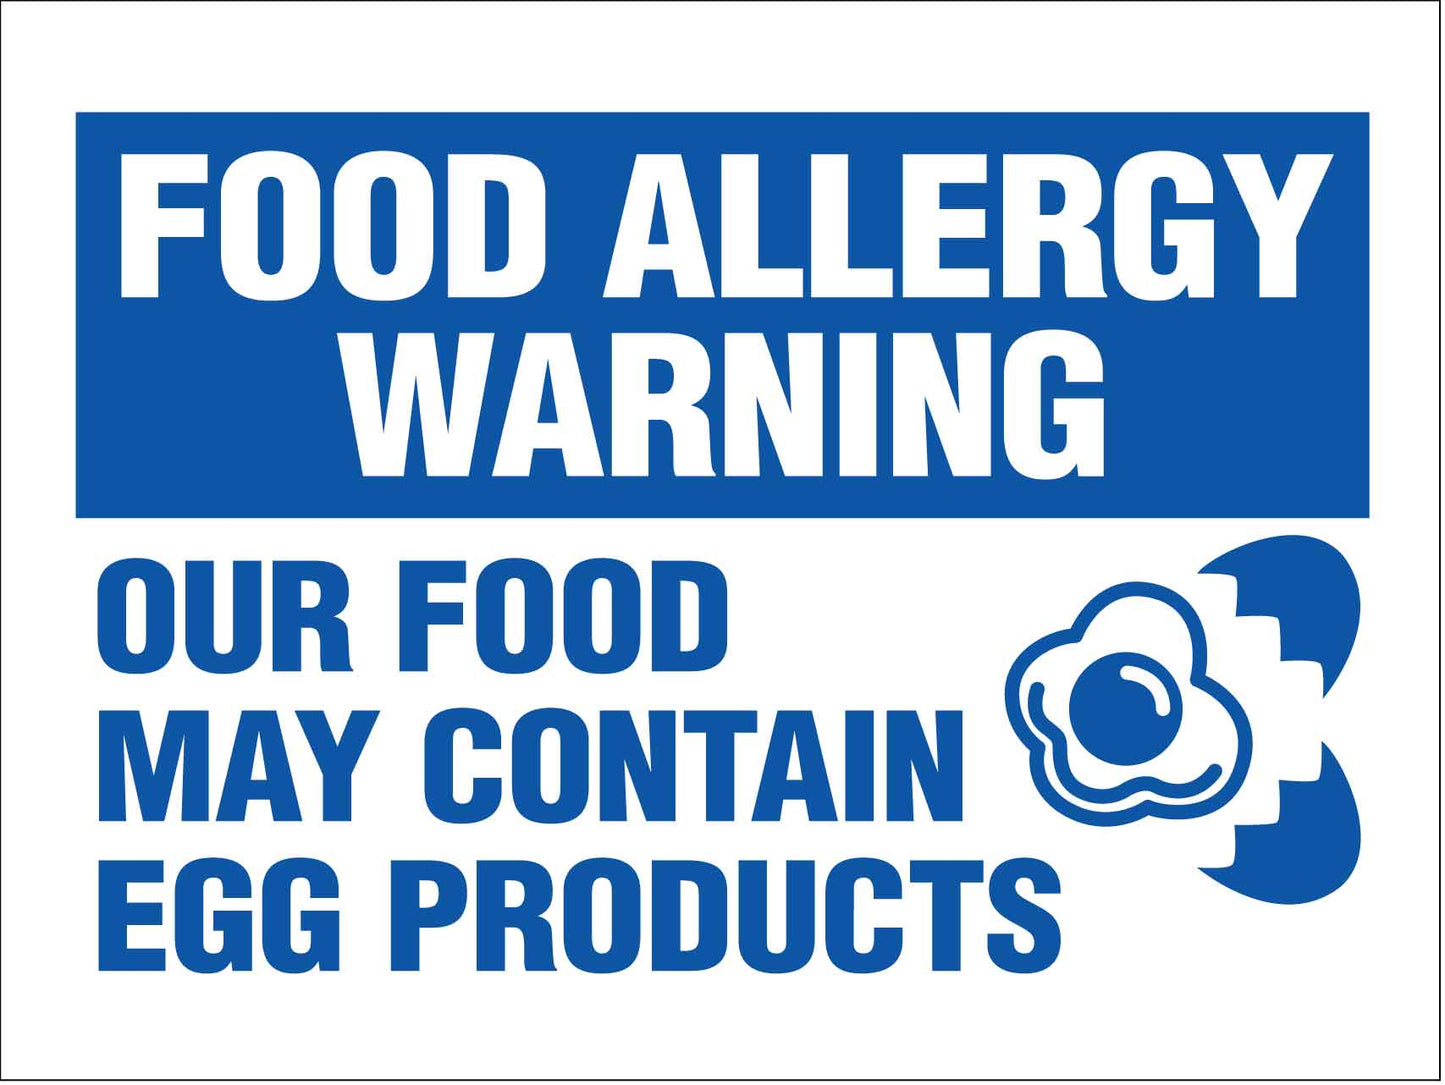 Food Allergy Warning Egg Products Sign